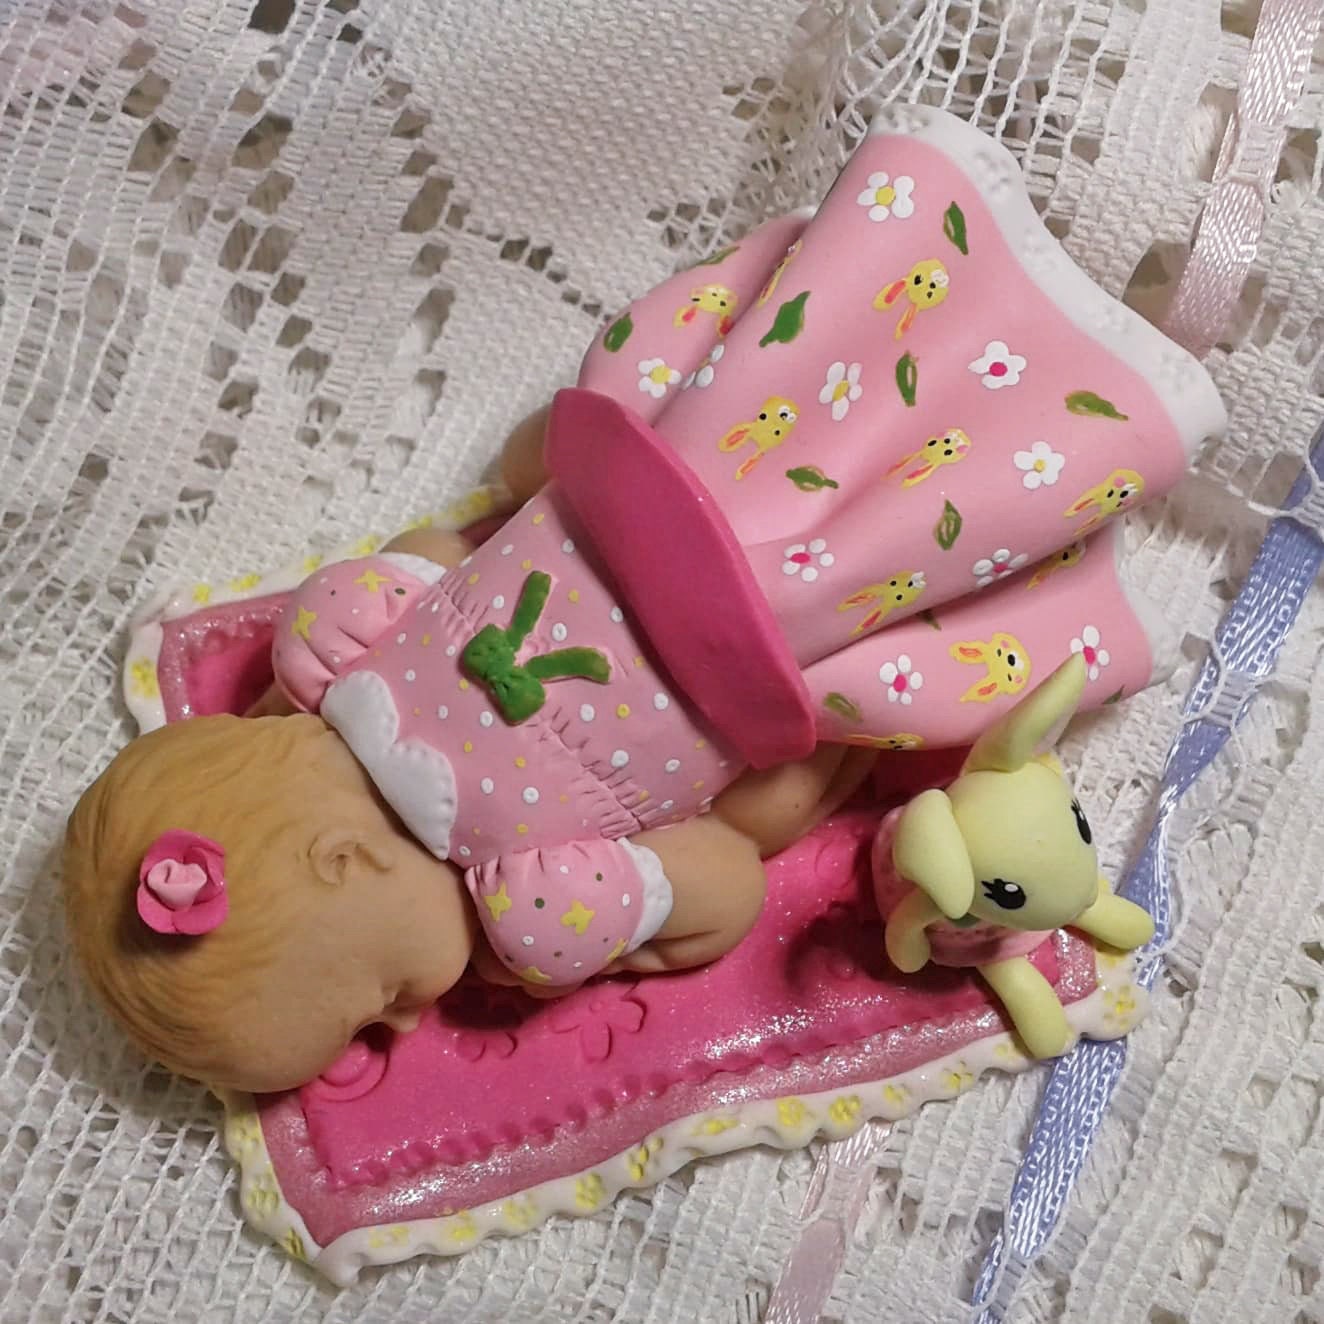 Baptismal Cake Topper Baby Figurine and Animal on a Blanket - Etsy